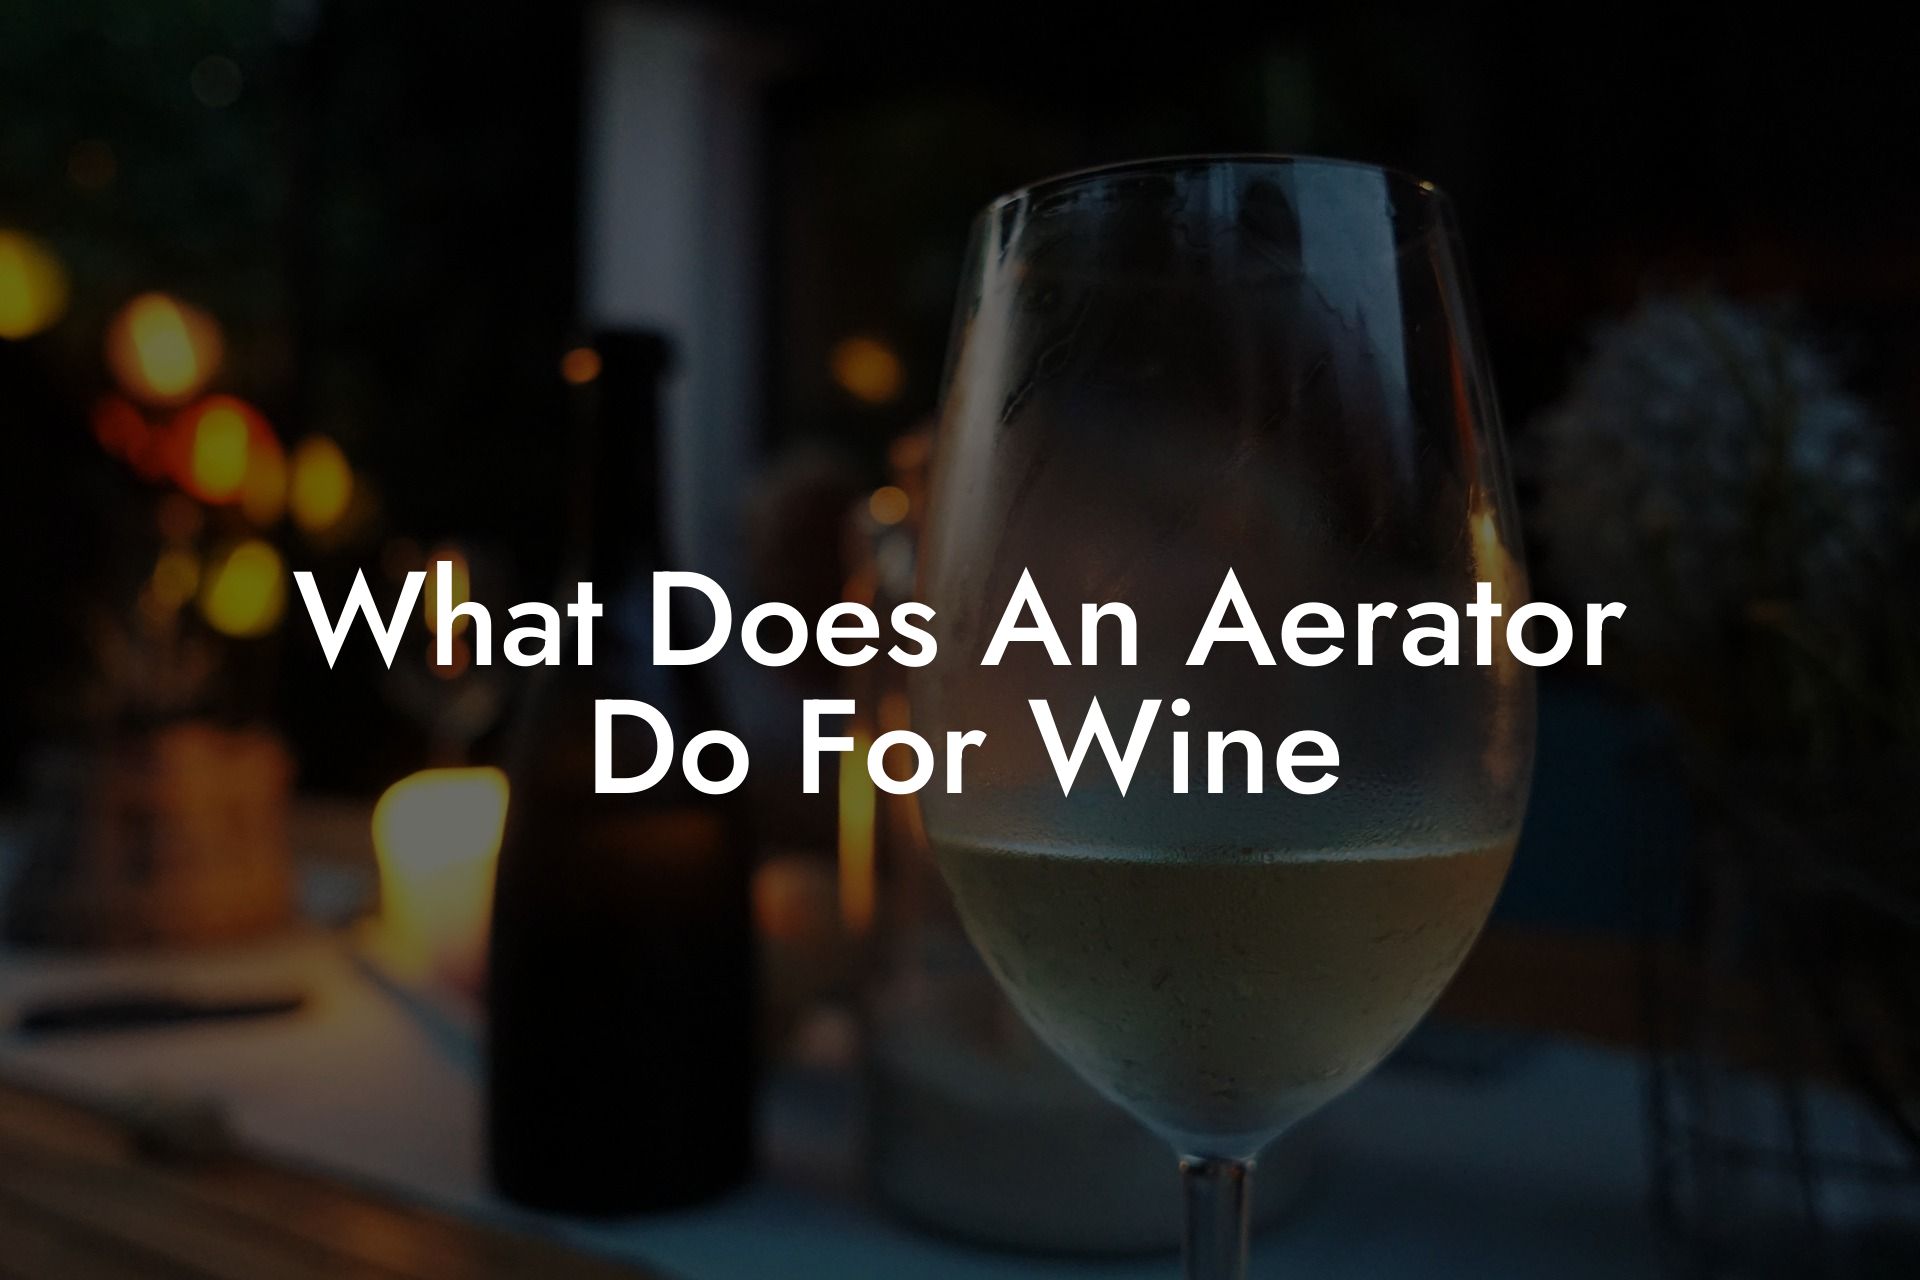 What Does An Aerator Do For Wine